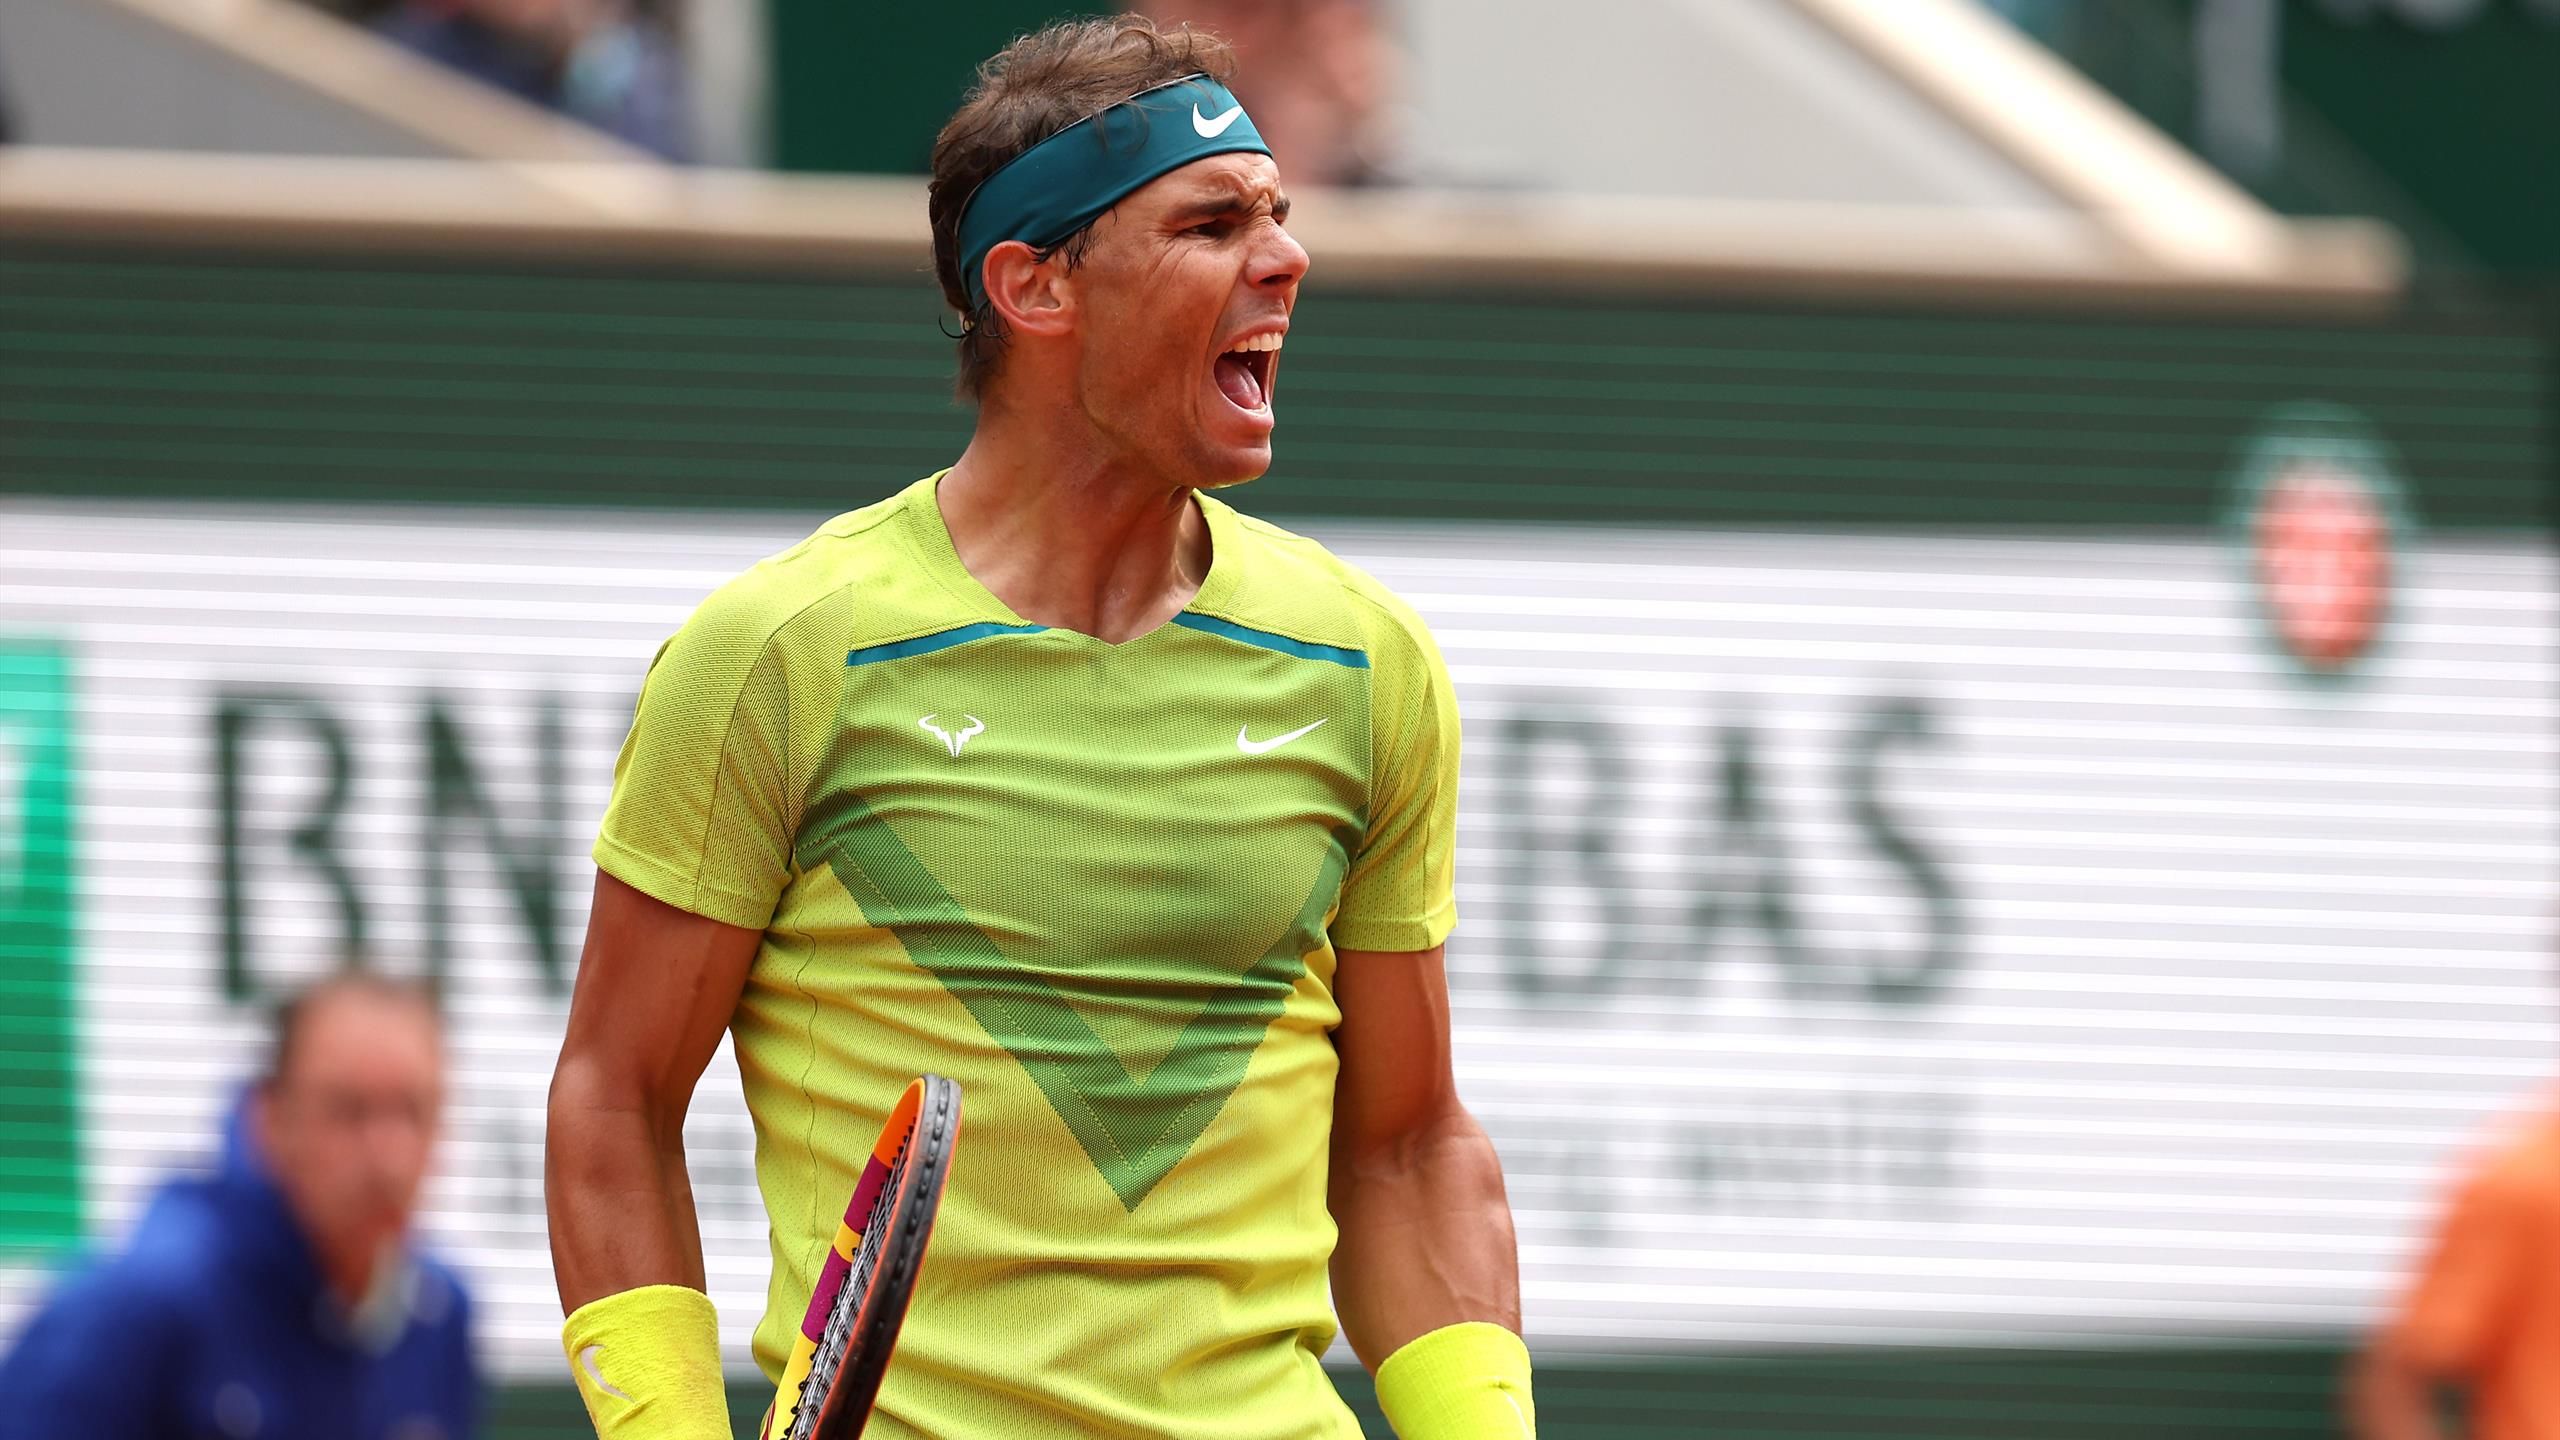 French Open 2022 It was difficult - Rafael Nadal digs in to beat Felix Auger-Aliassime and set up Novak Djokovic test